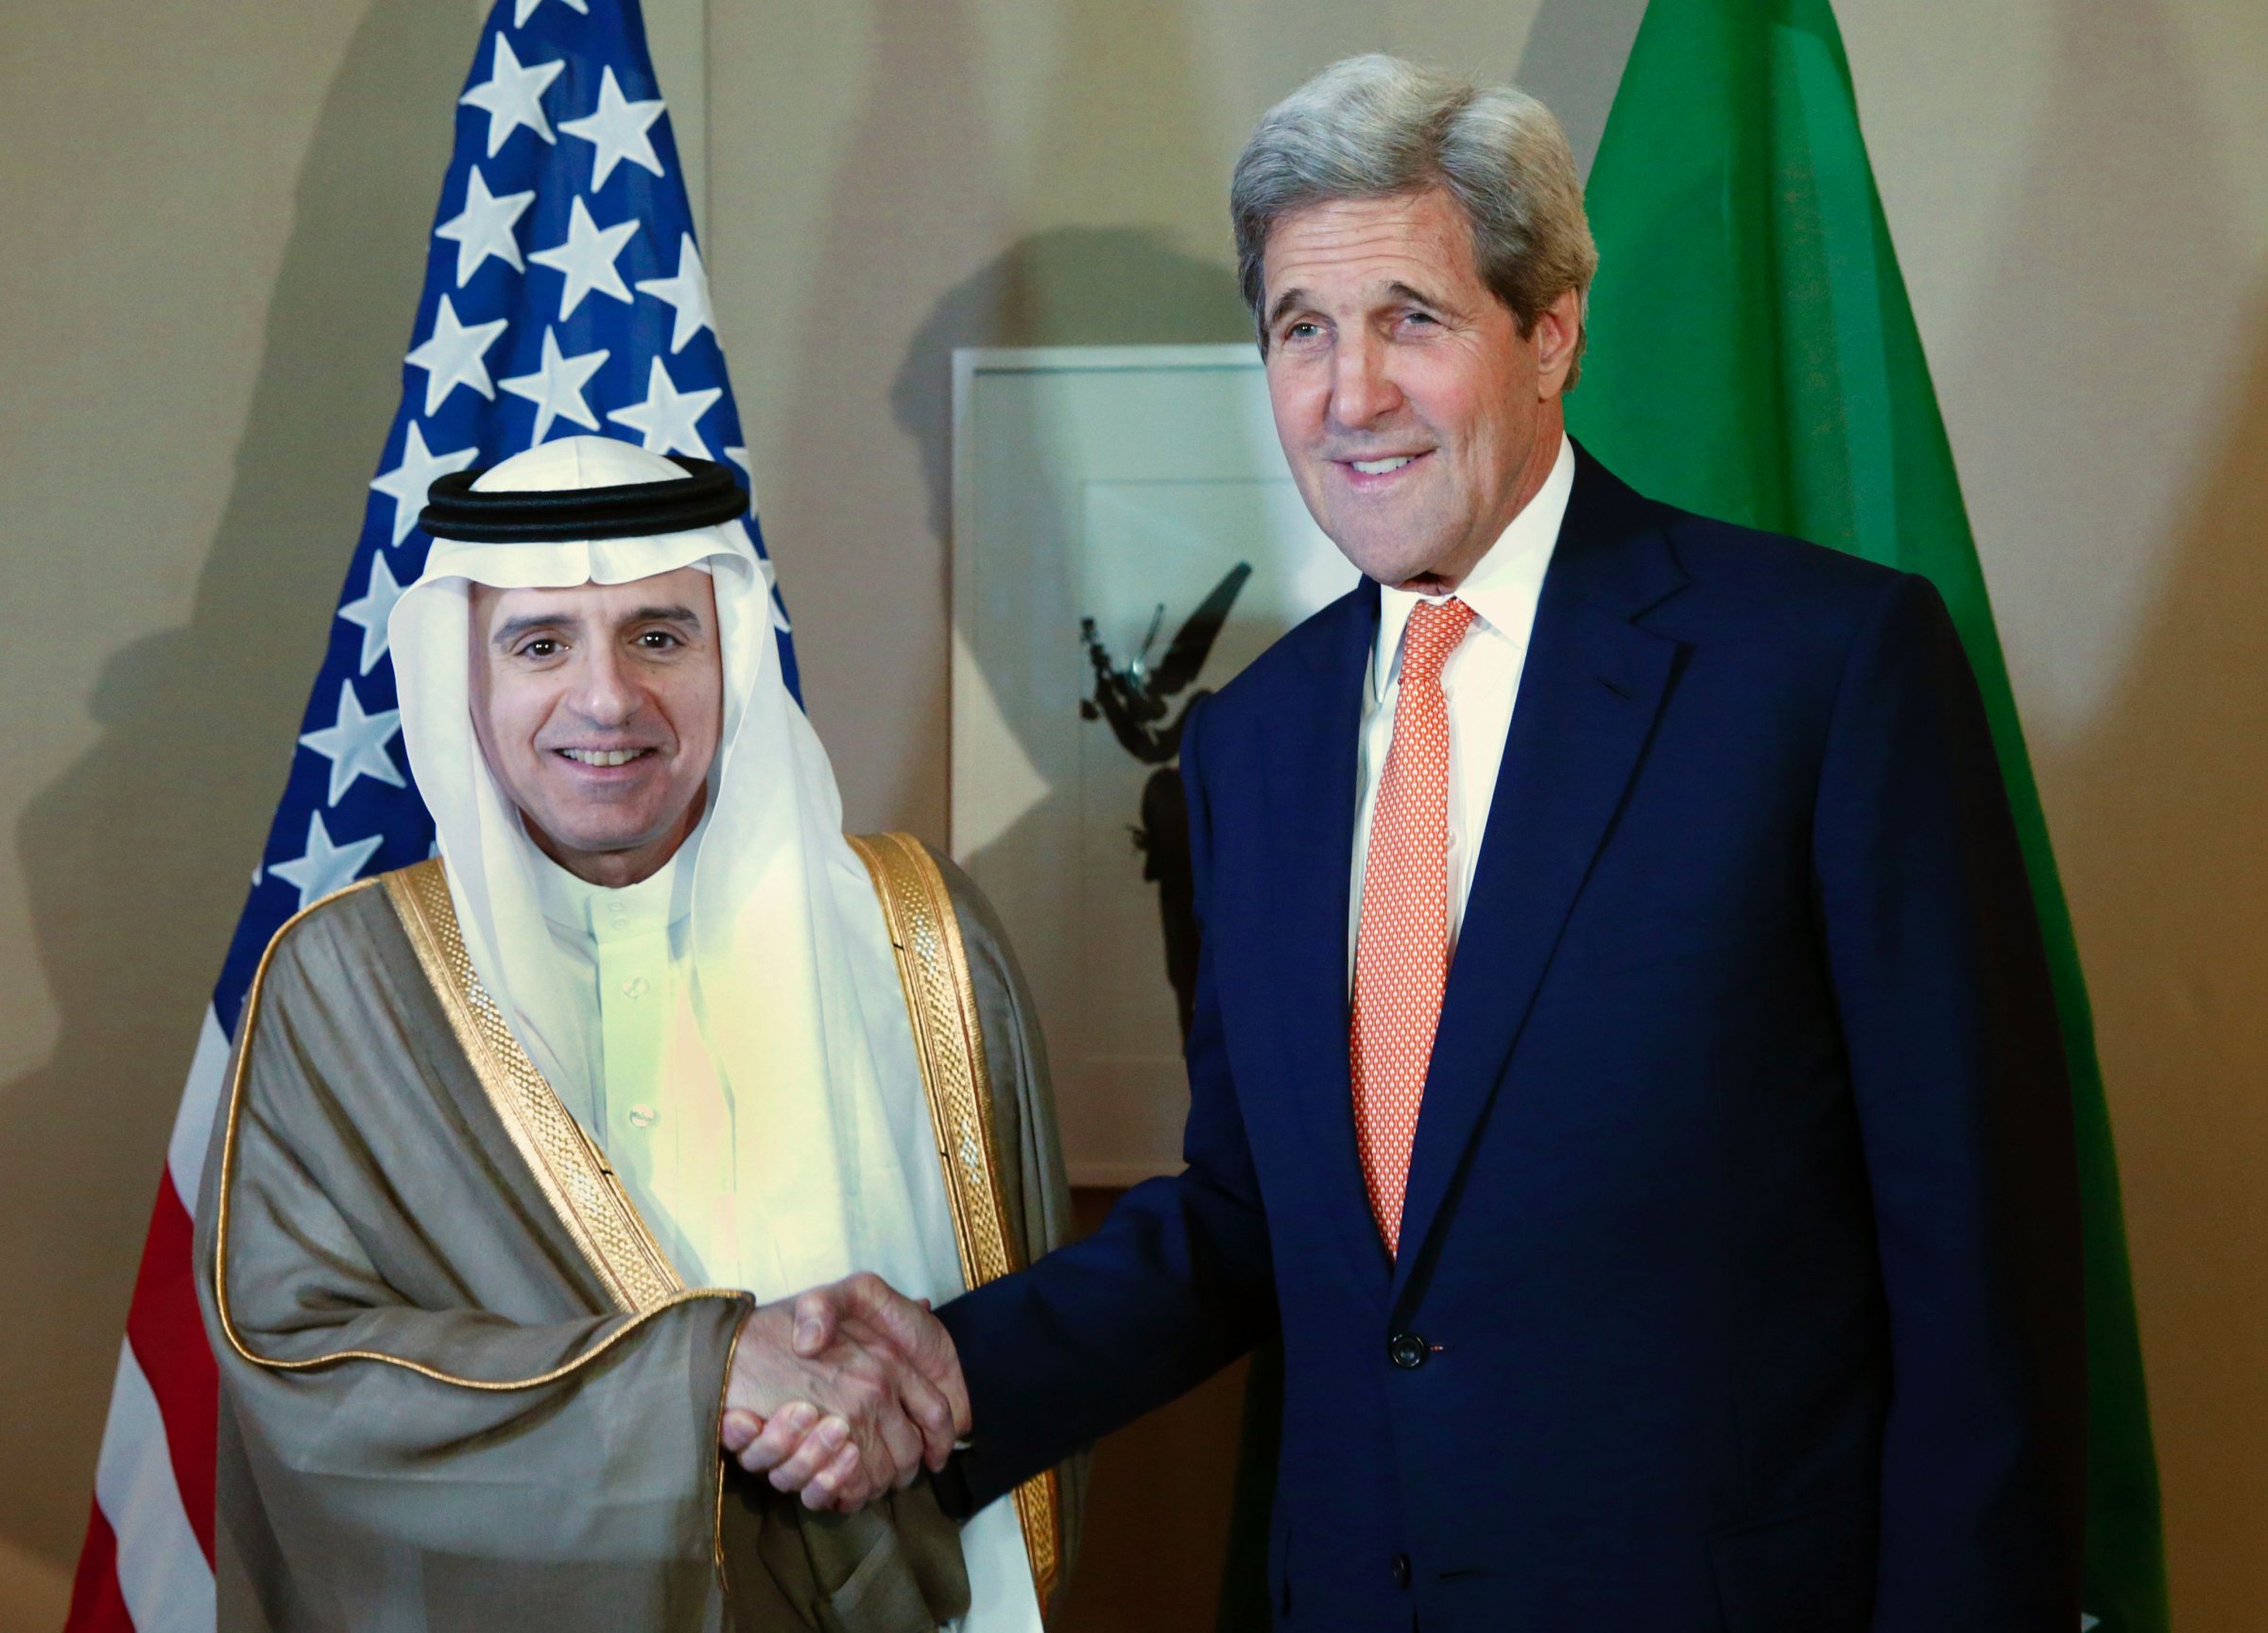 Saudi Foreign Minister Adel al-Jubeir shakes hand with US Secretary of State John Kerry during a meeting on Syria in Geneva, on May 2, 2016.